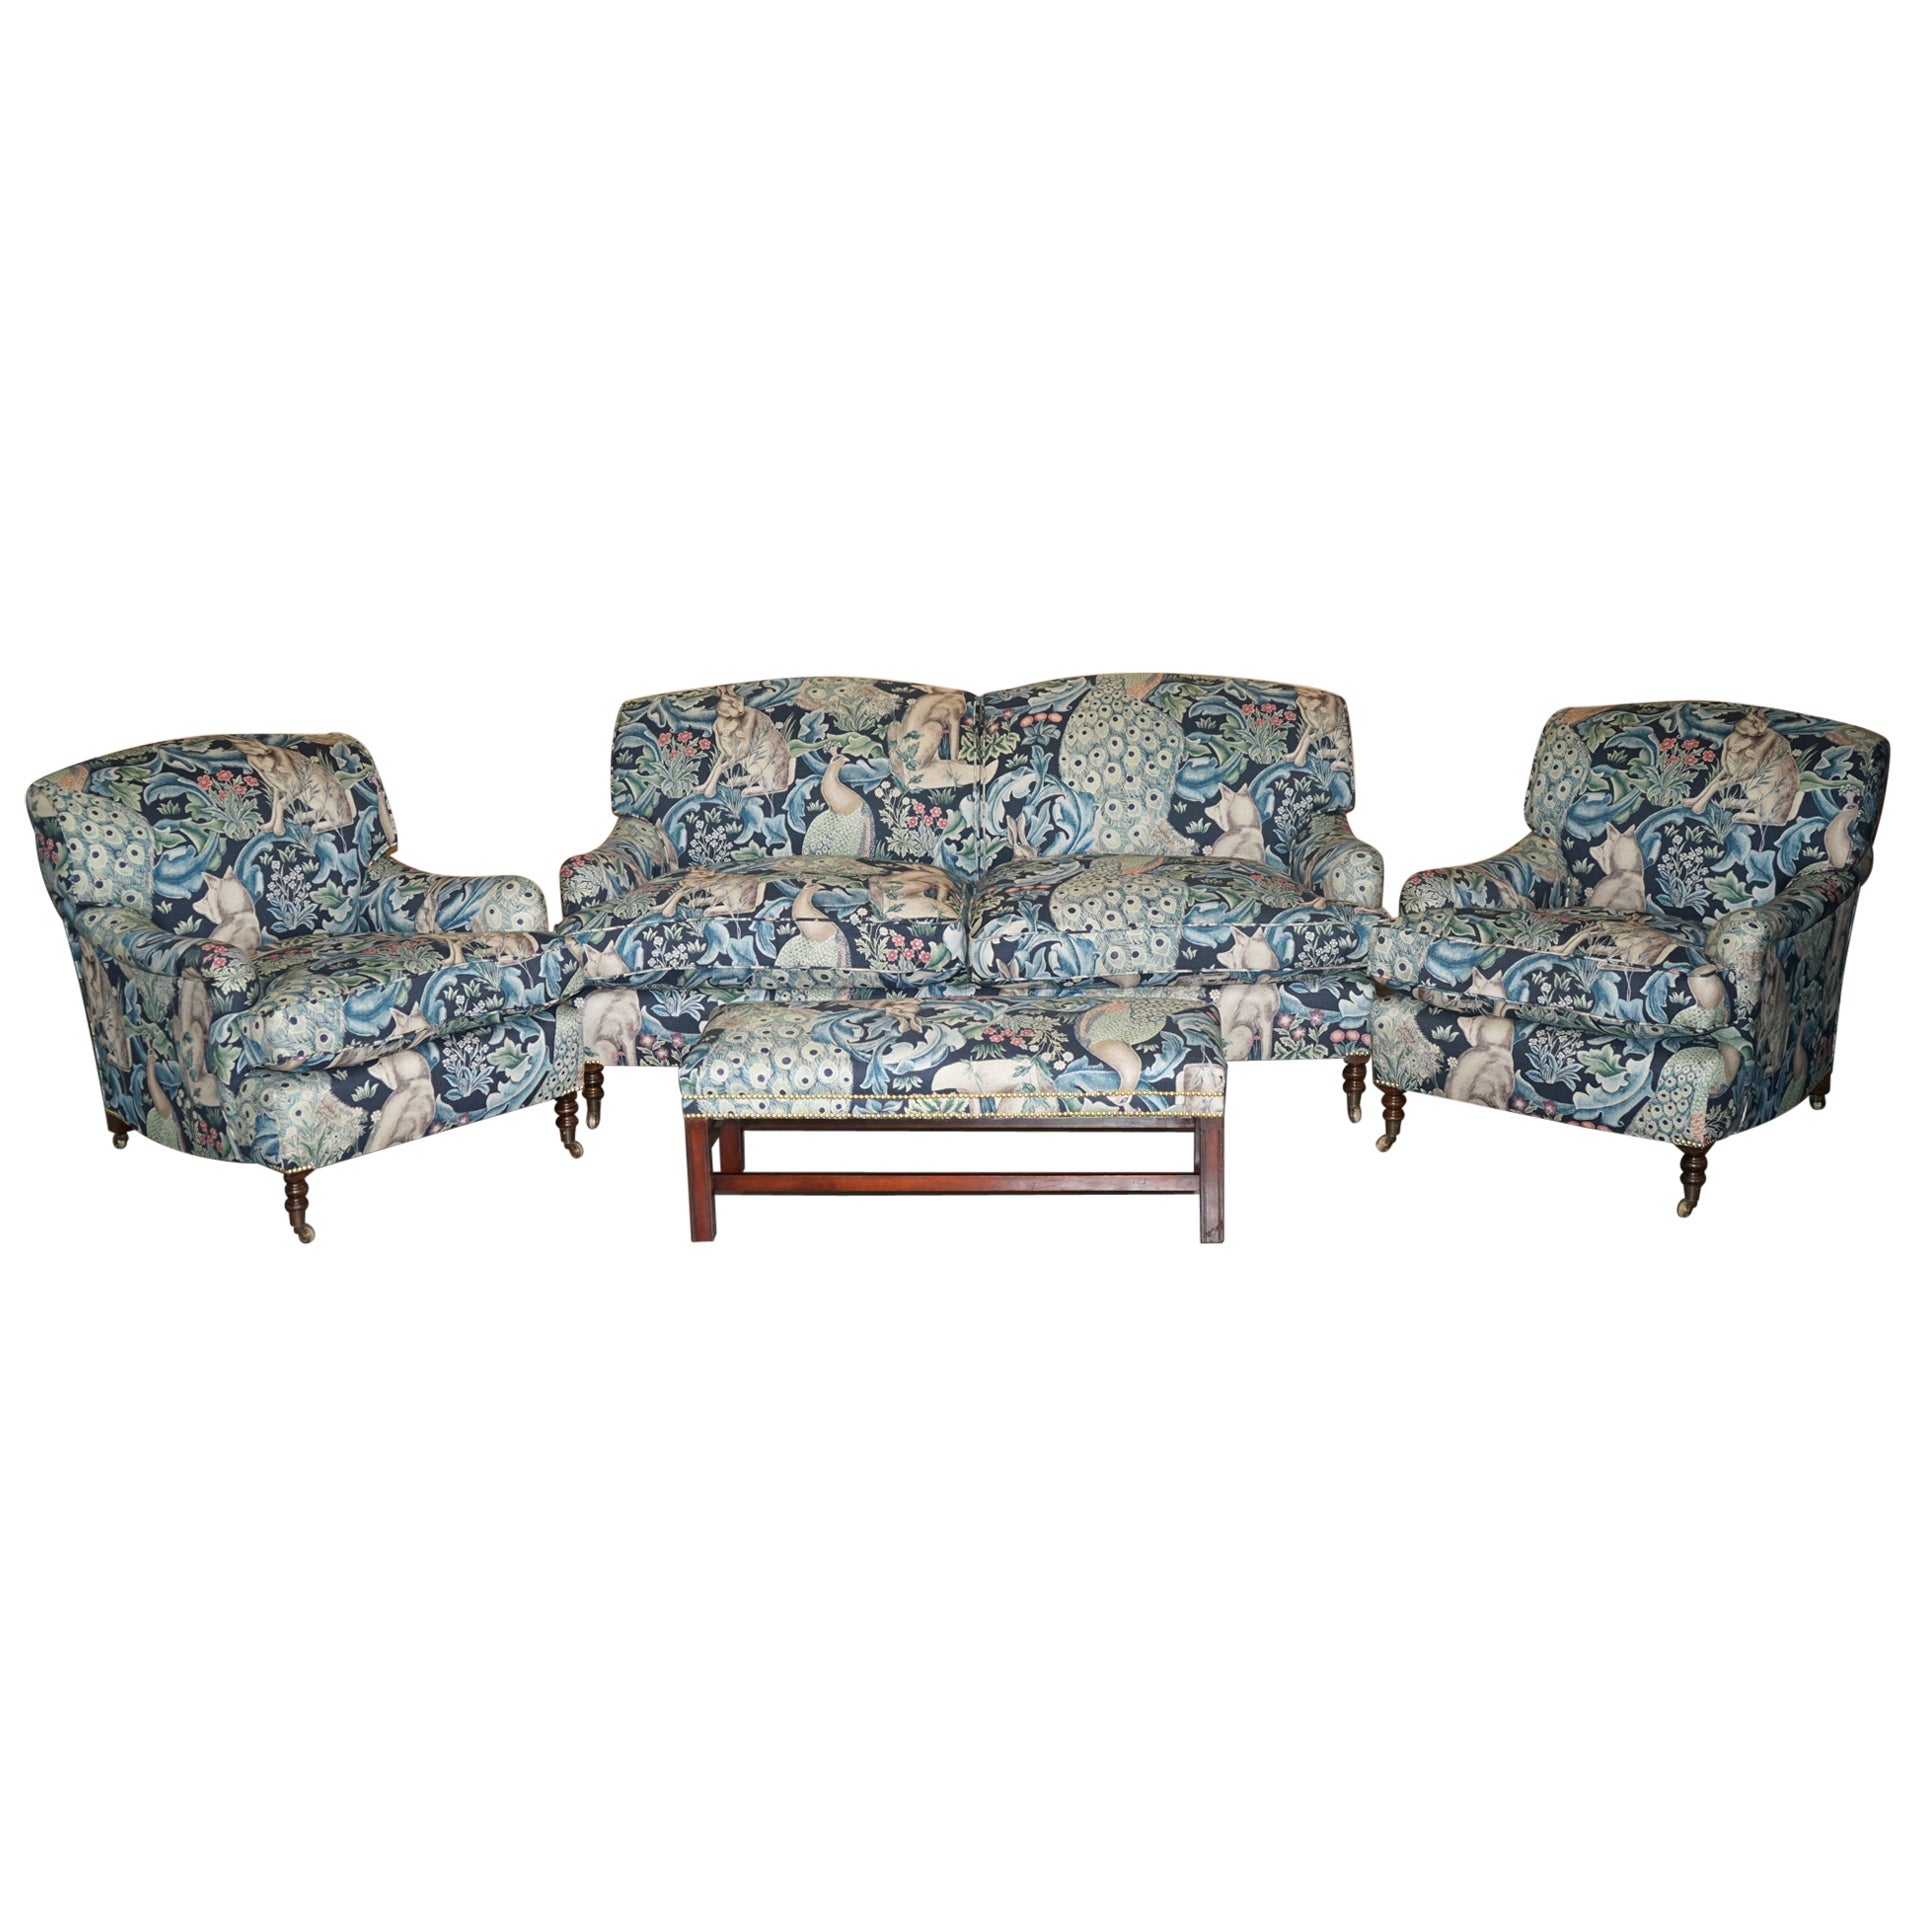  GEORGE SMiTH HOWARD & SON'S WILLIAM MORRIS SOFA ARMCHAIR SUITE For Sale